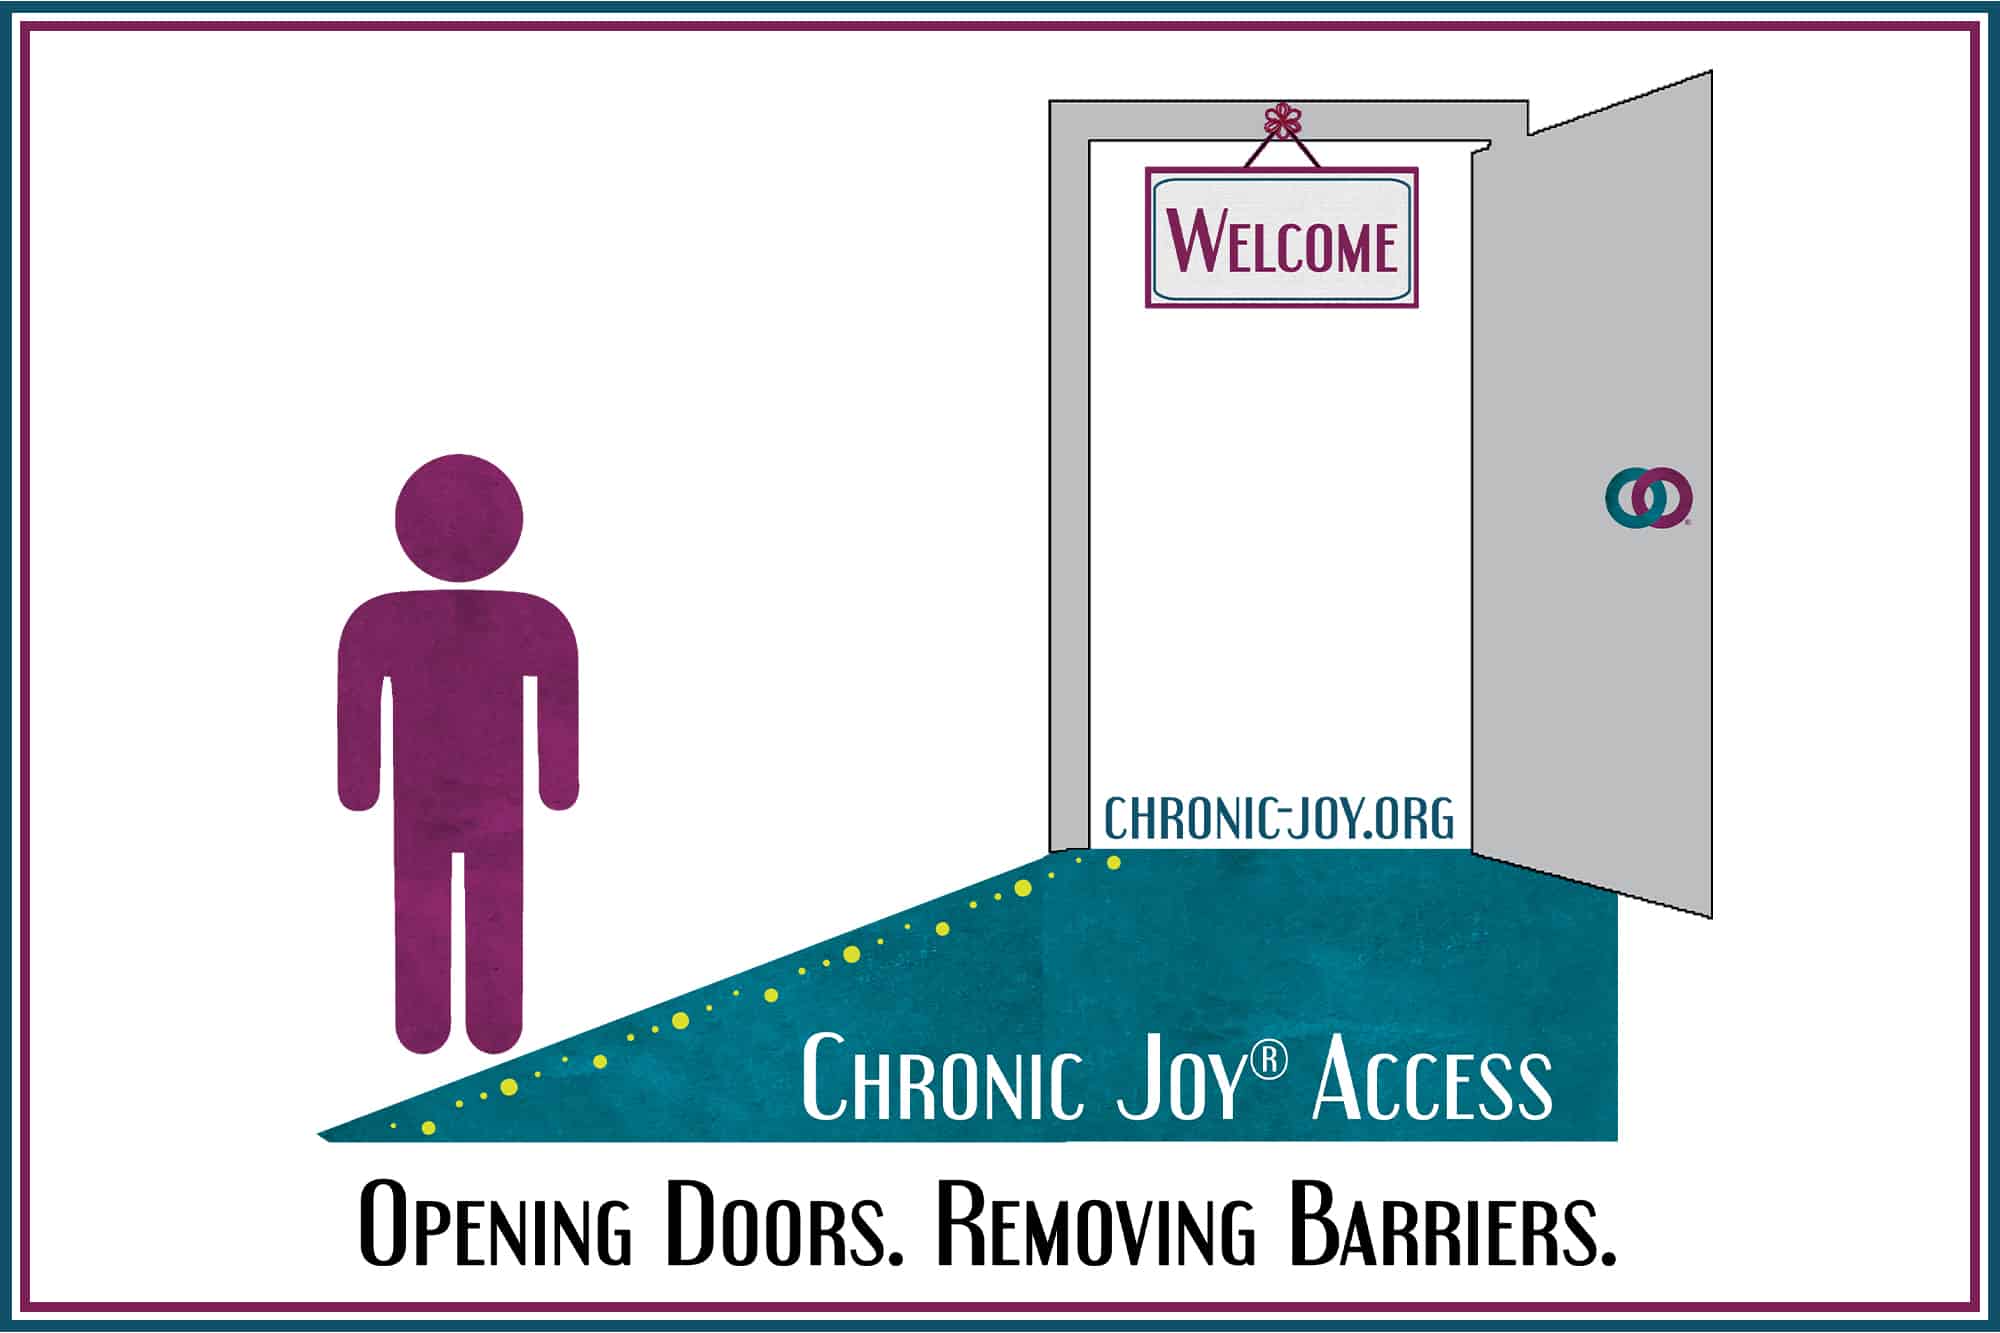 Chronic Joy® Access • Accessibility. Opening doors. Removing barriers.